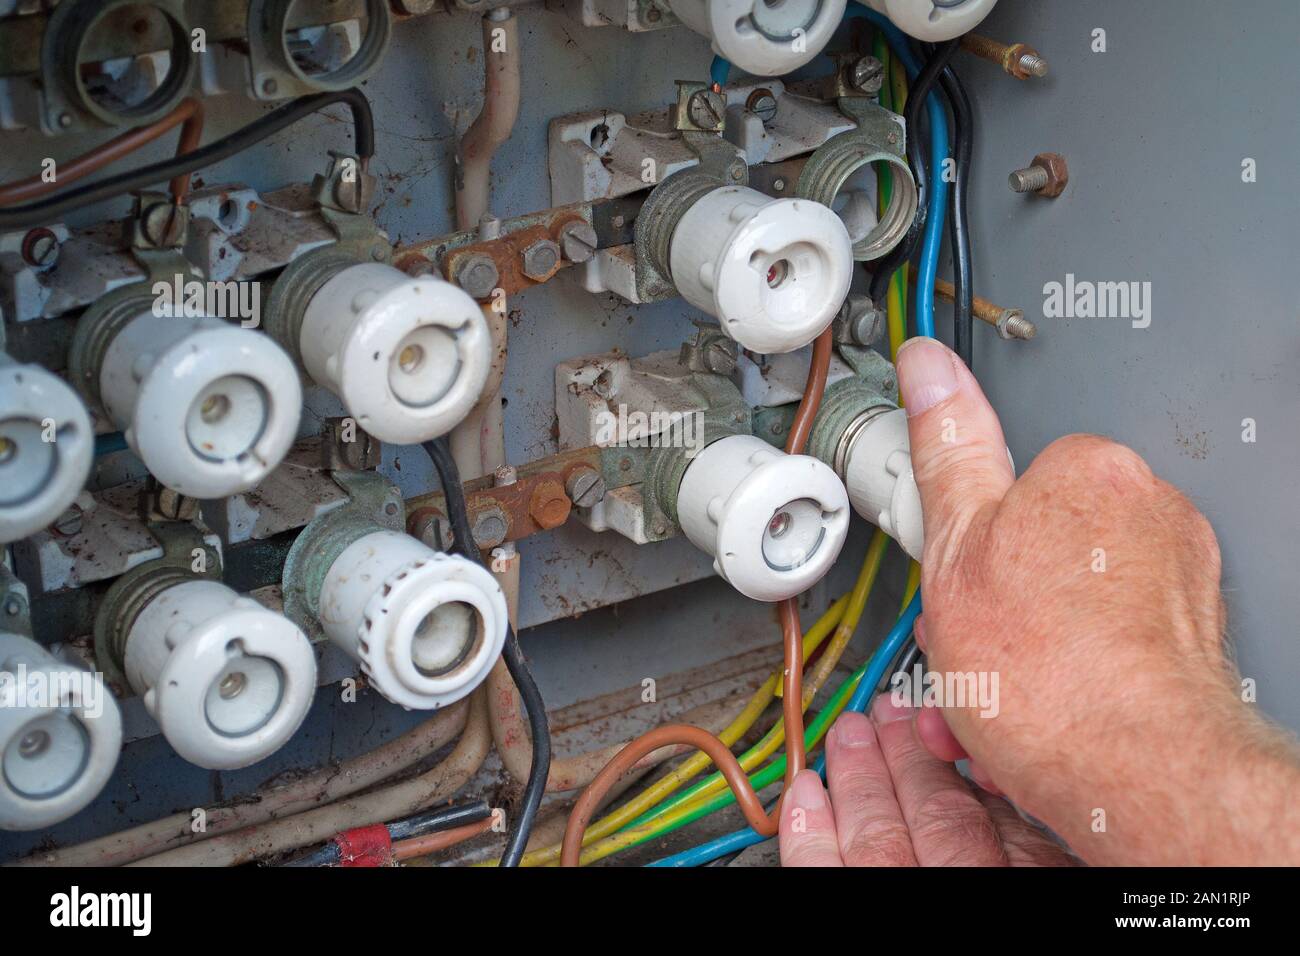 Fuse box with old ceramic fuses Stock Photo